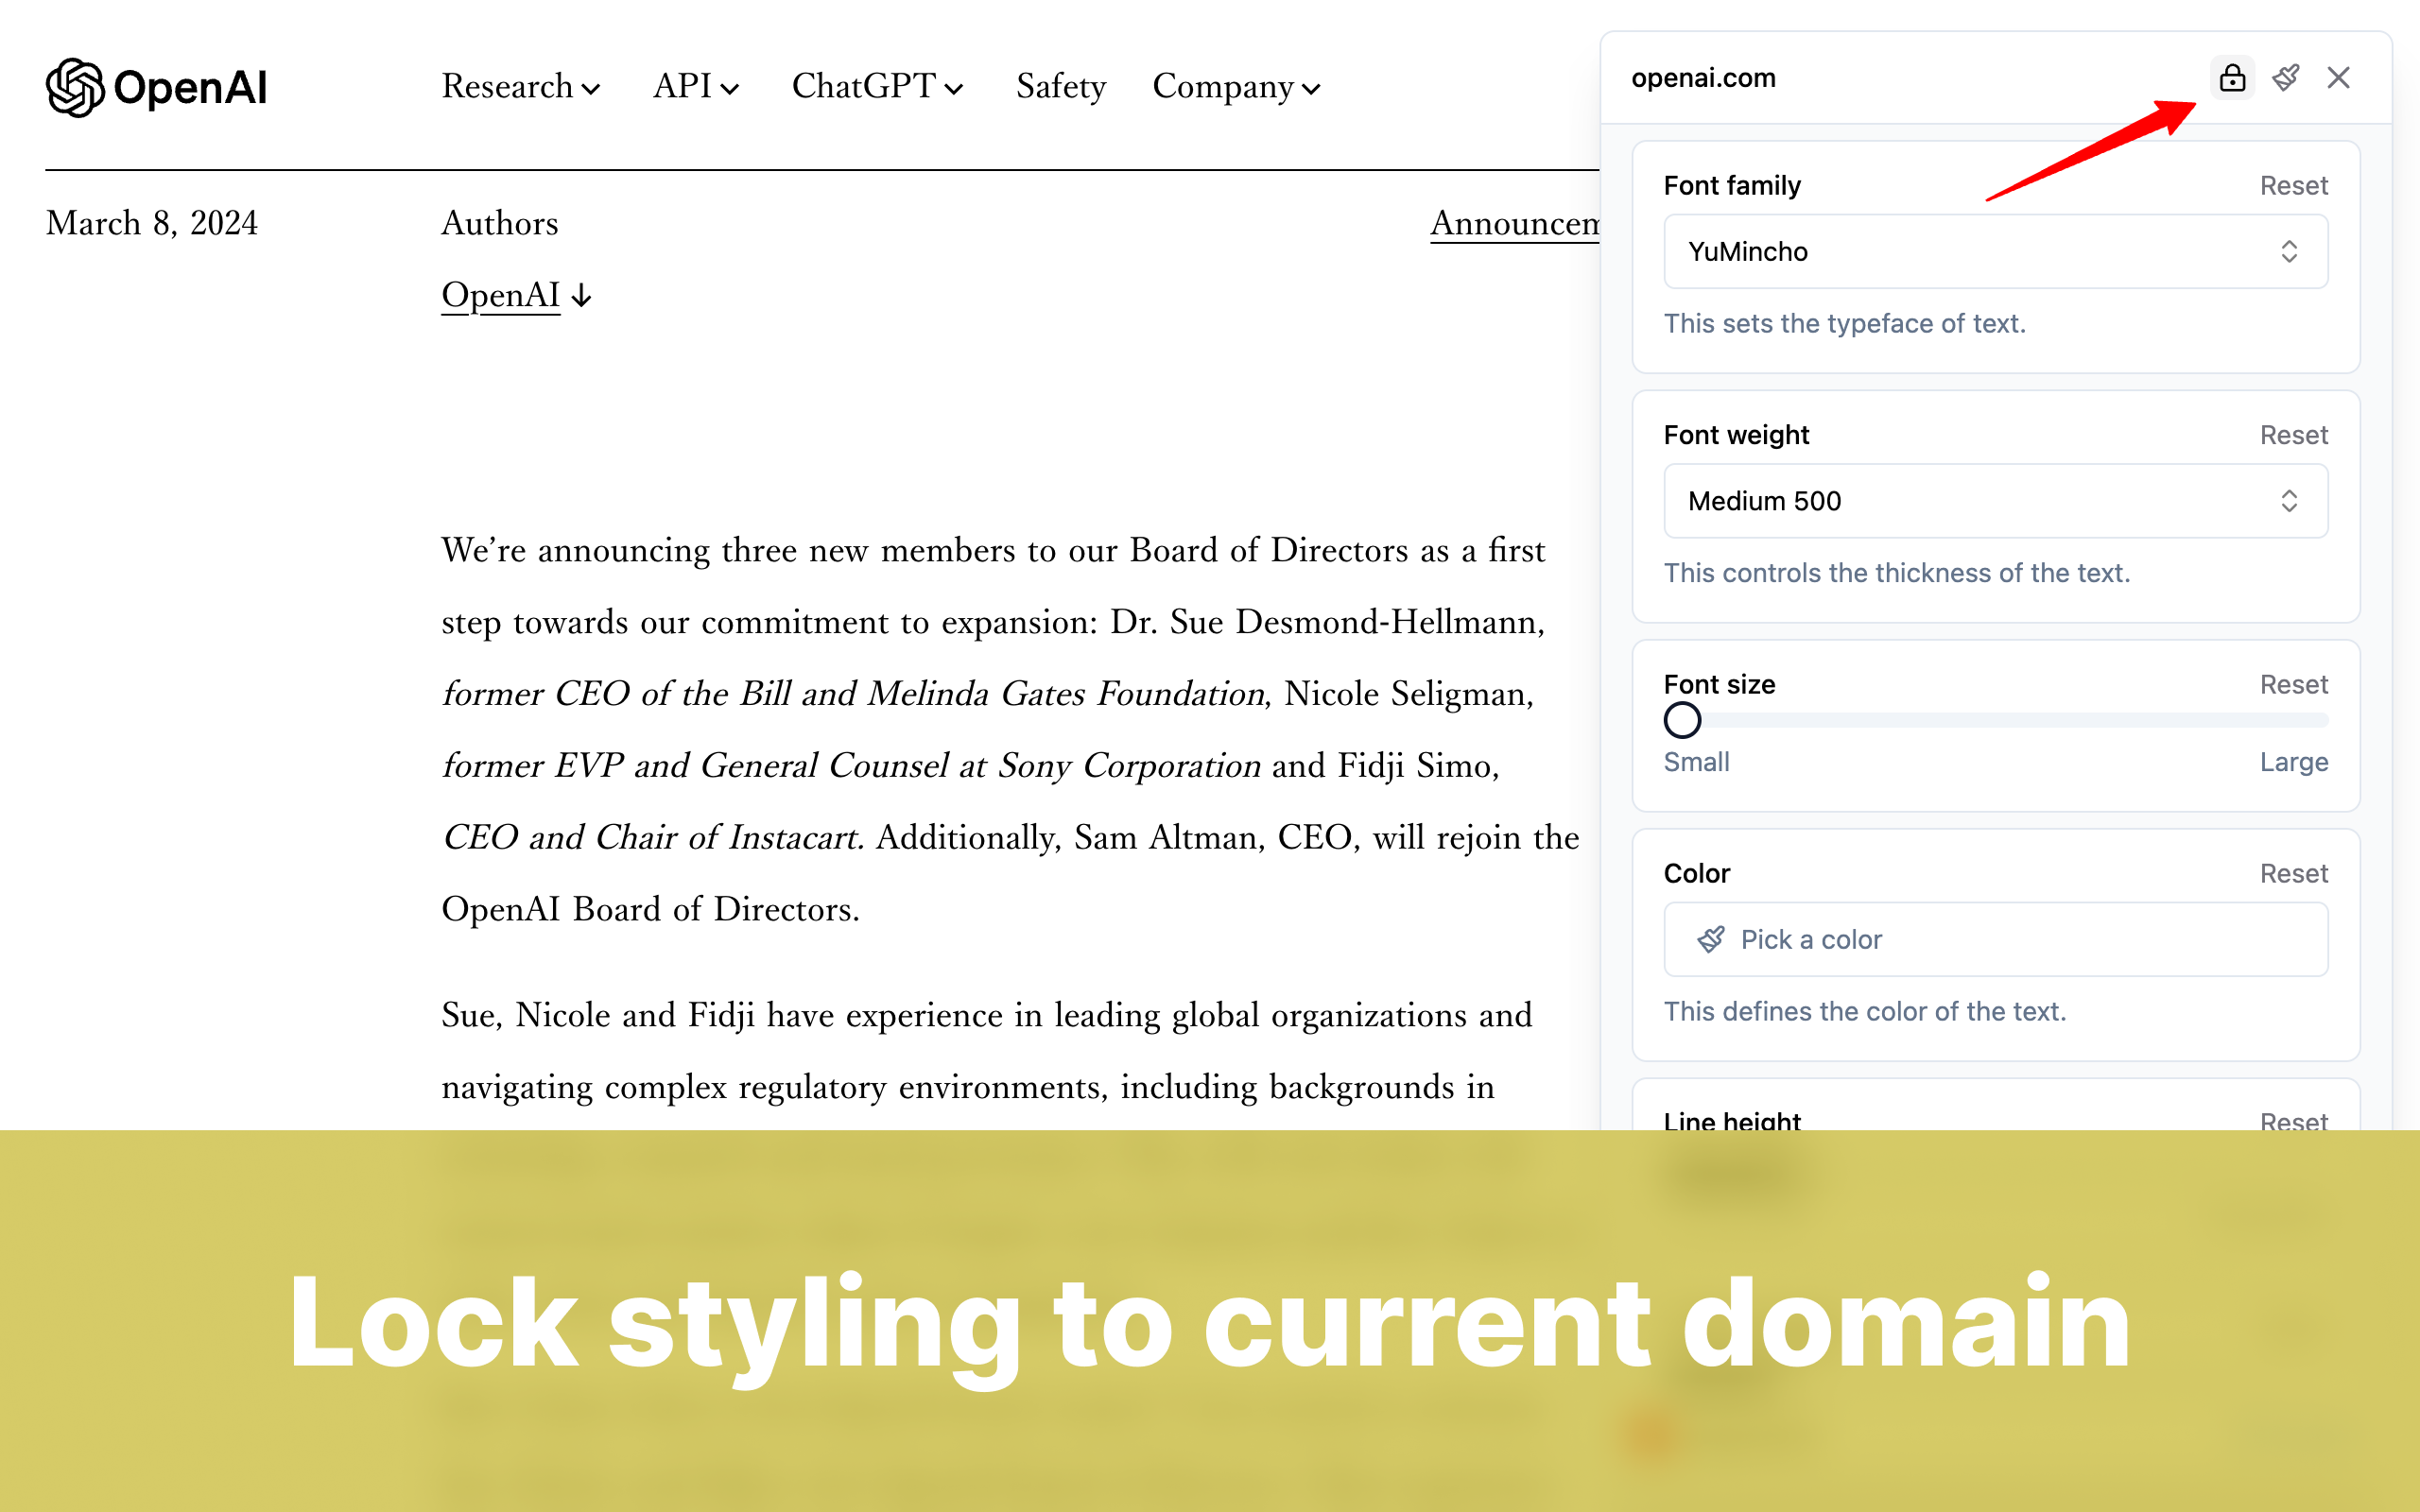 BetterFont lock styling to current domain